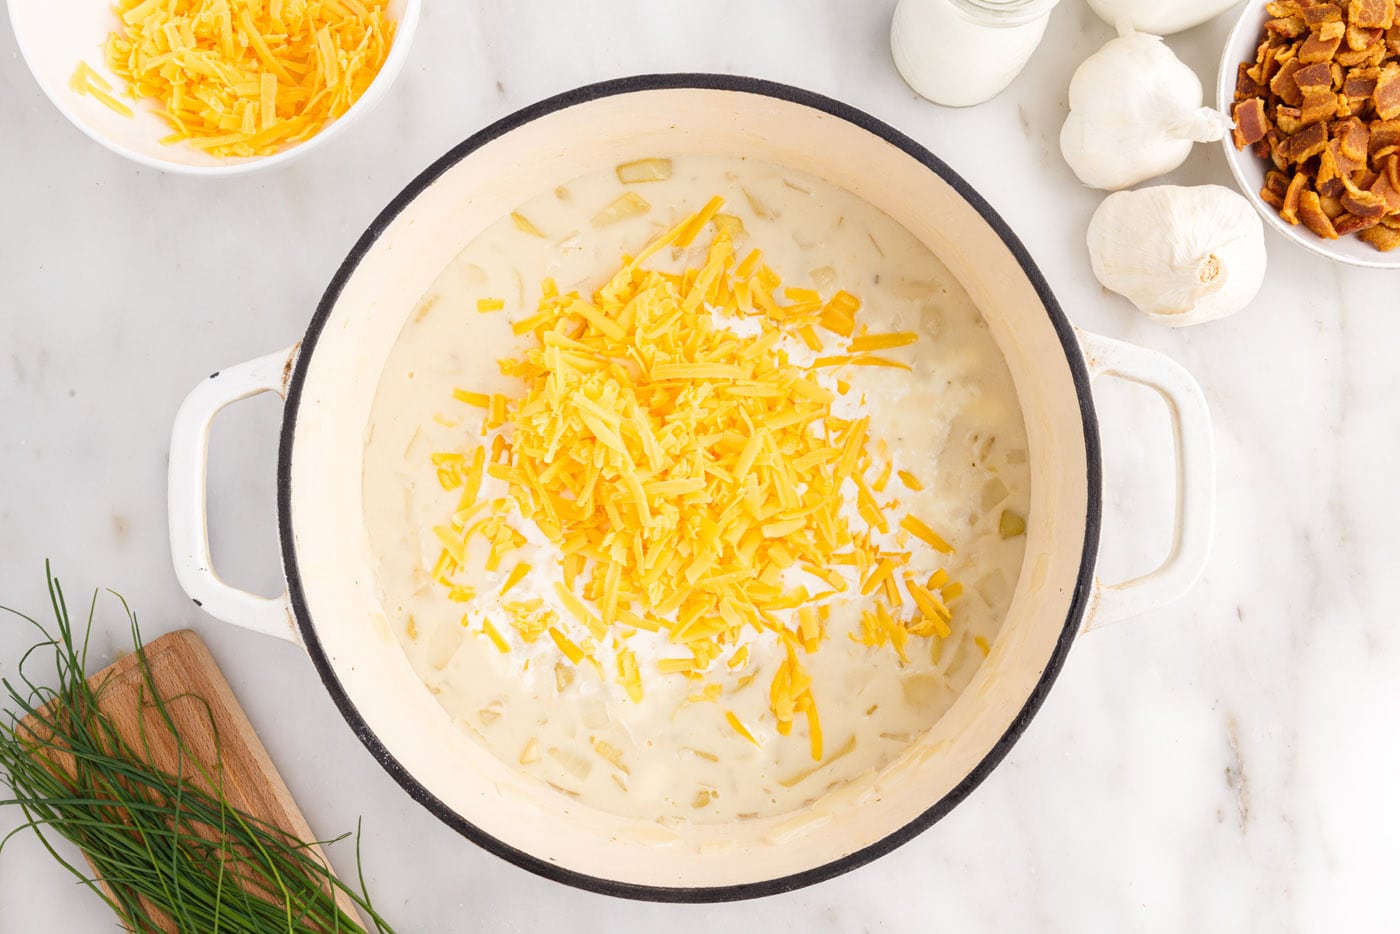 shredded cheese added to baked potato soup